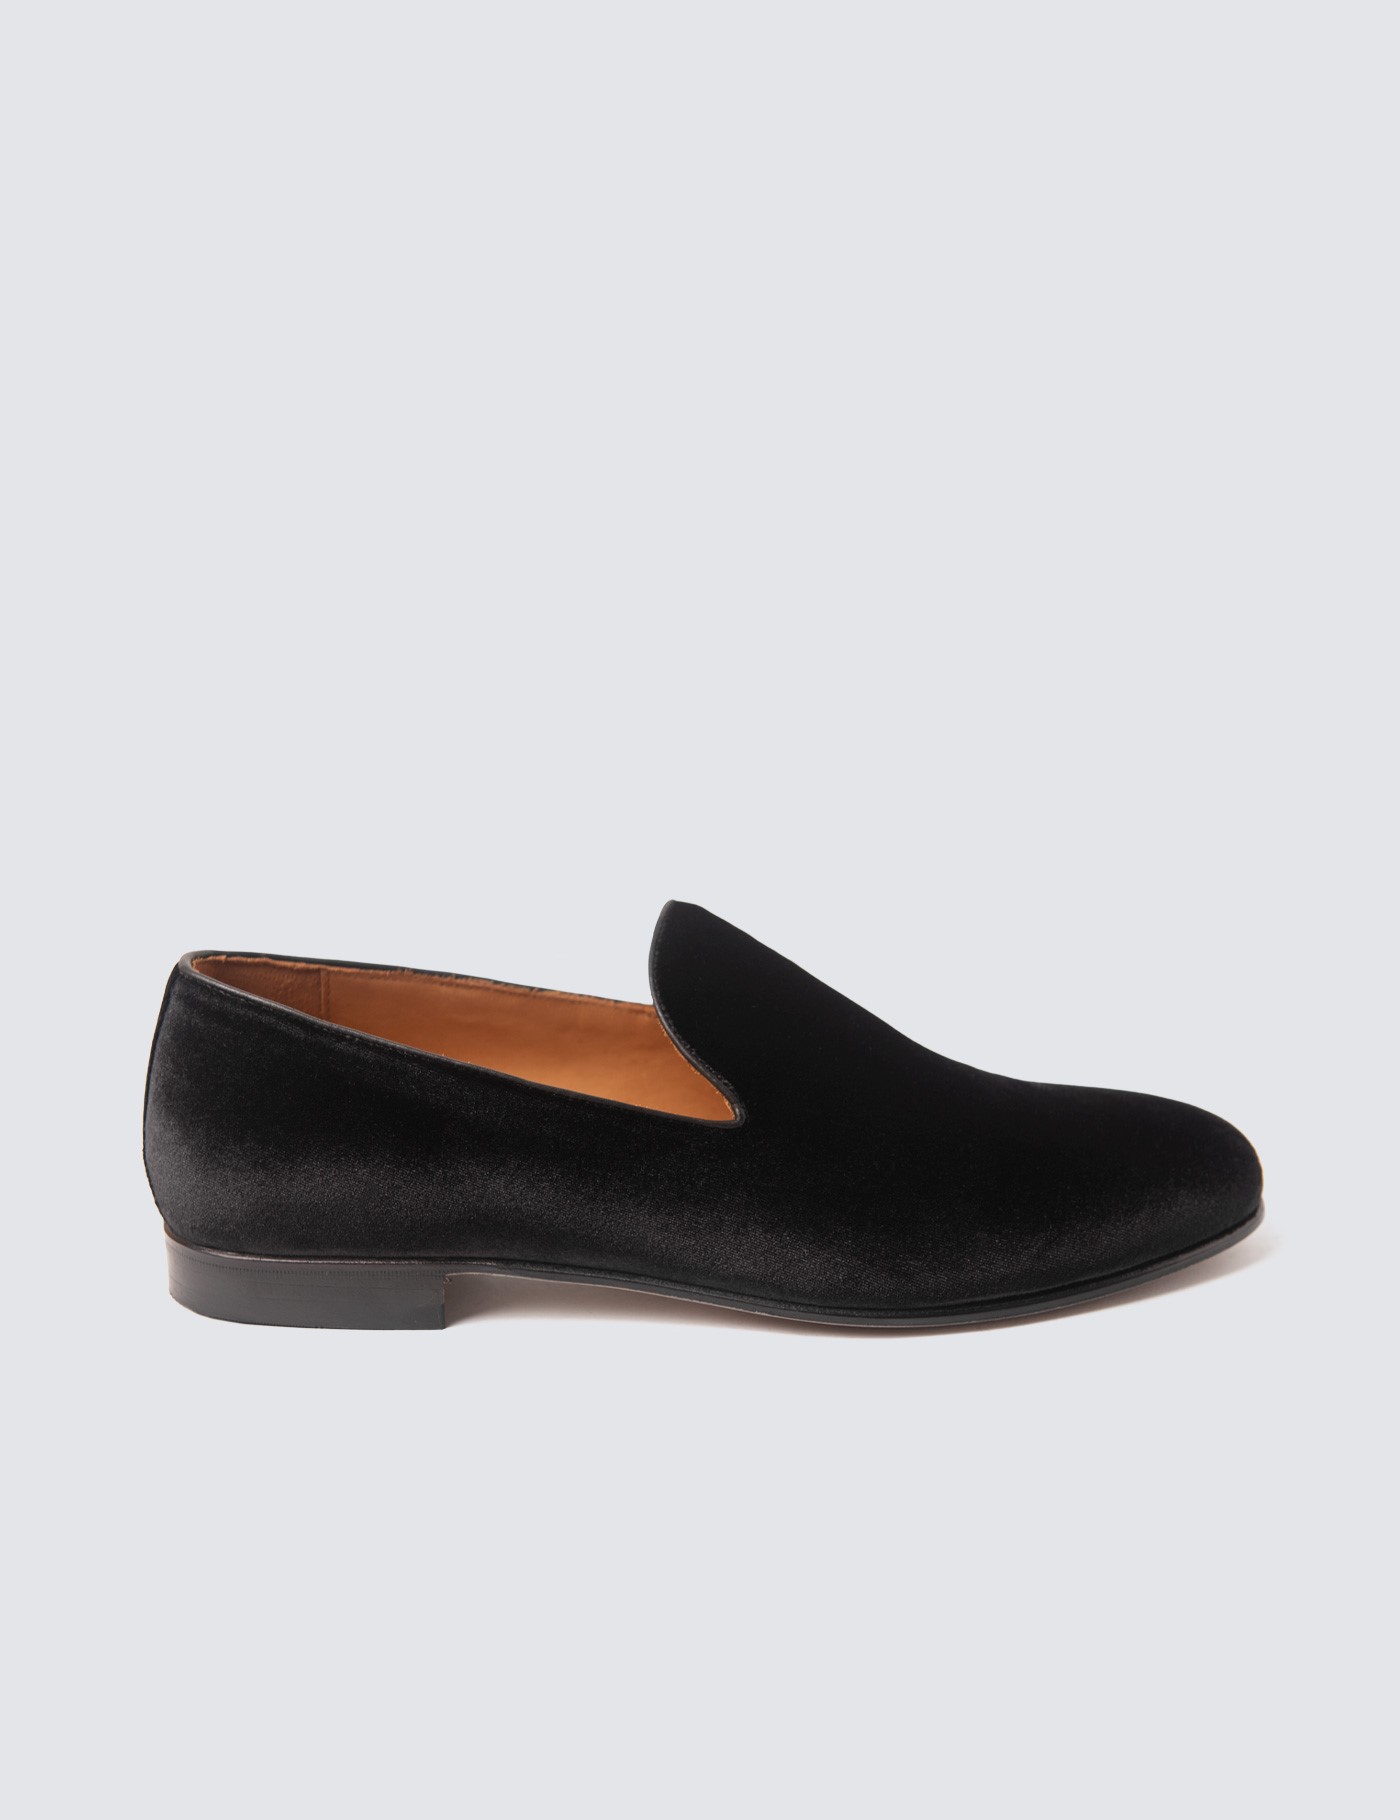 Velvet Men’s Loafers with Handmade Leather Sole in Black | Hawes ...